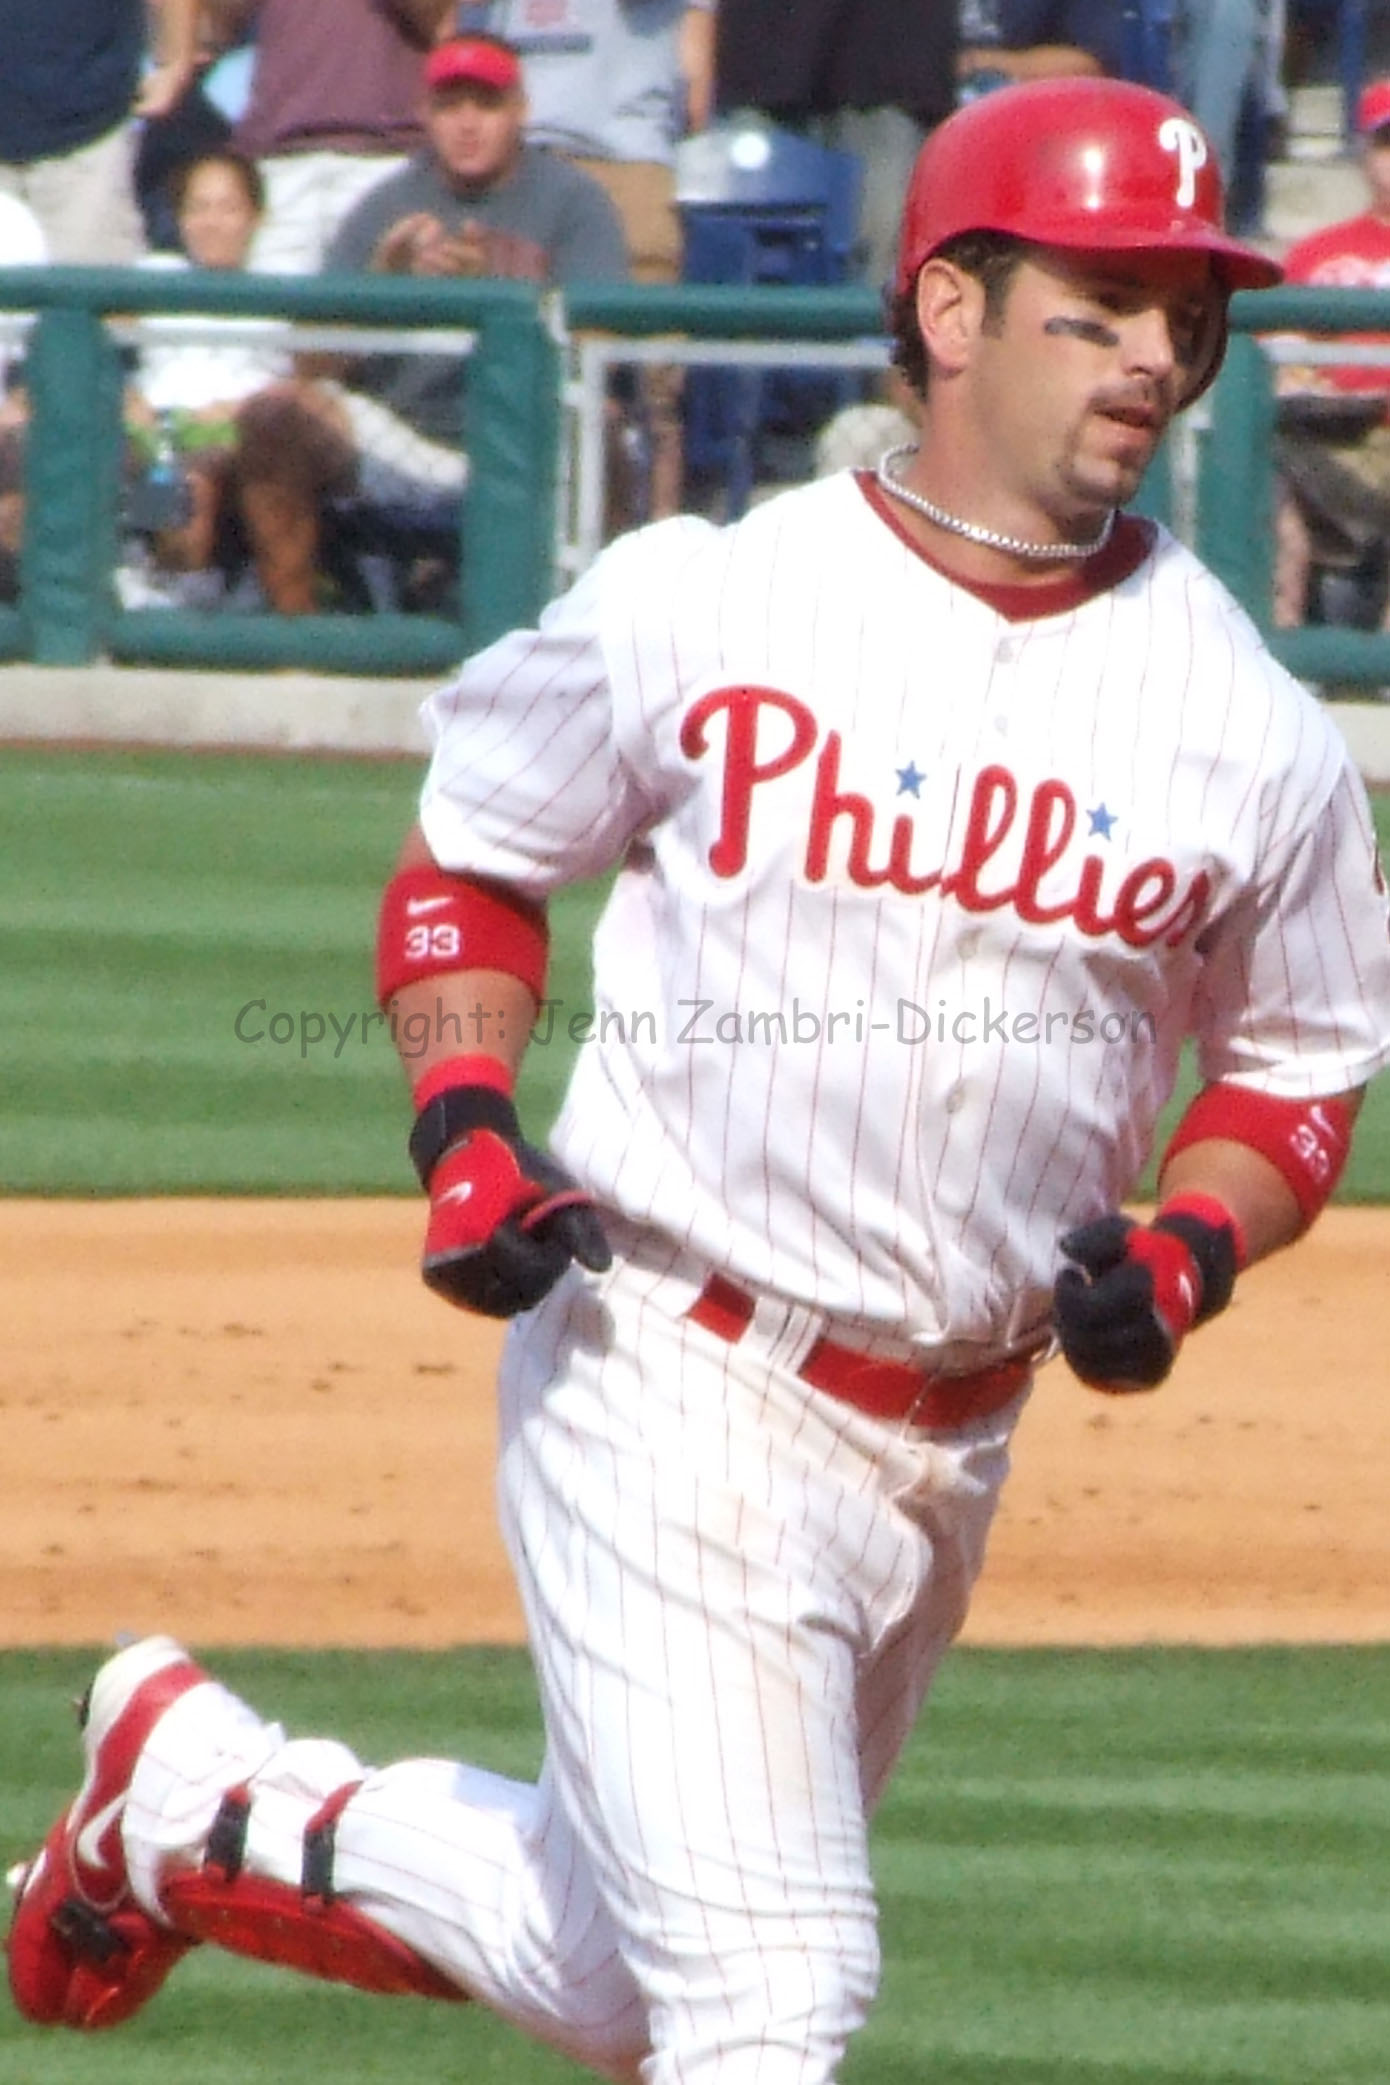 Inside the Phillies: Time for Phillies to bring back Aaron Rowand?